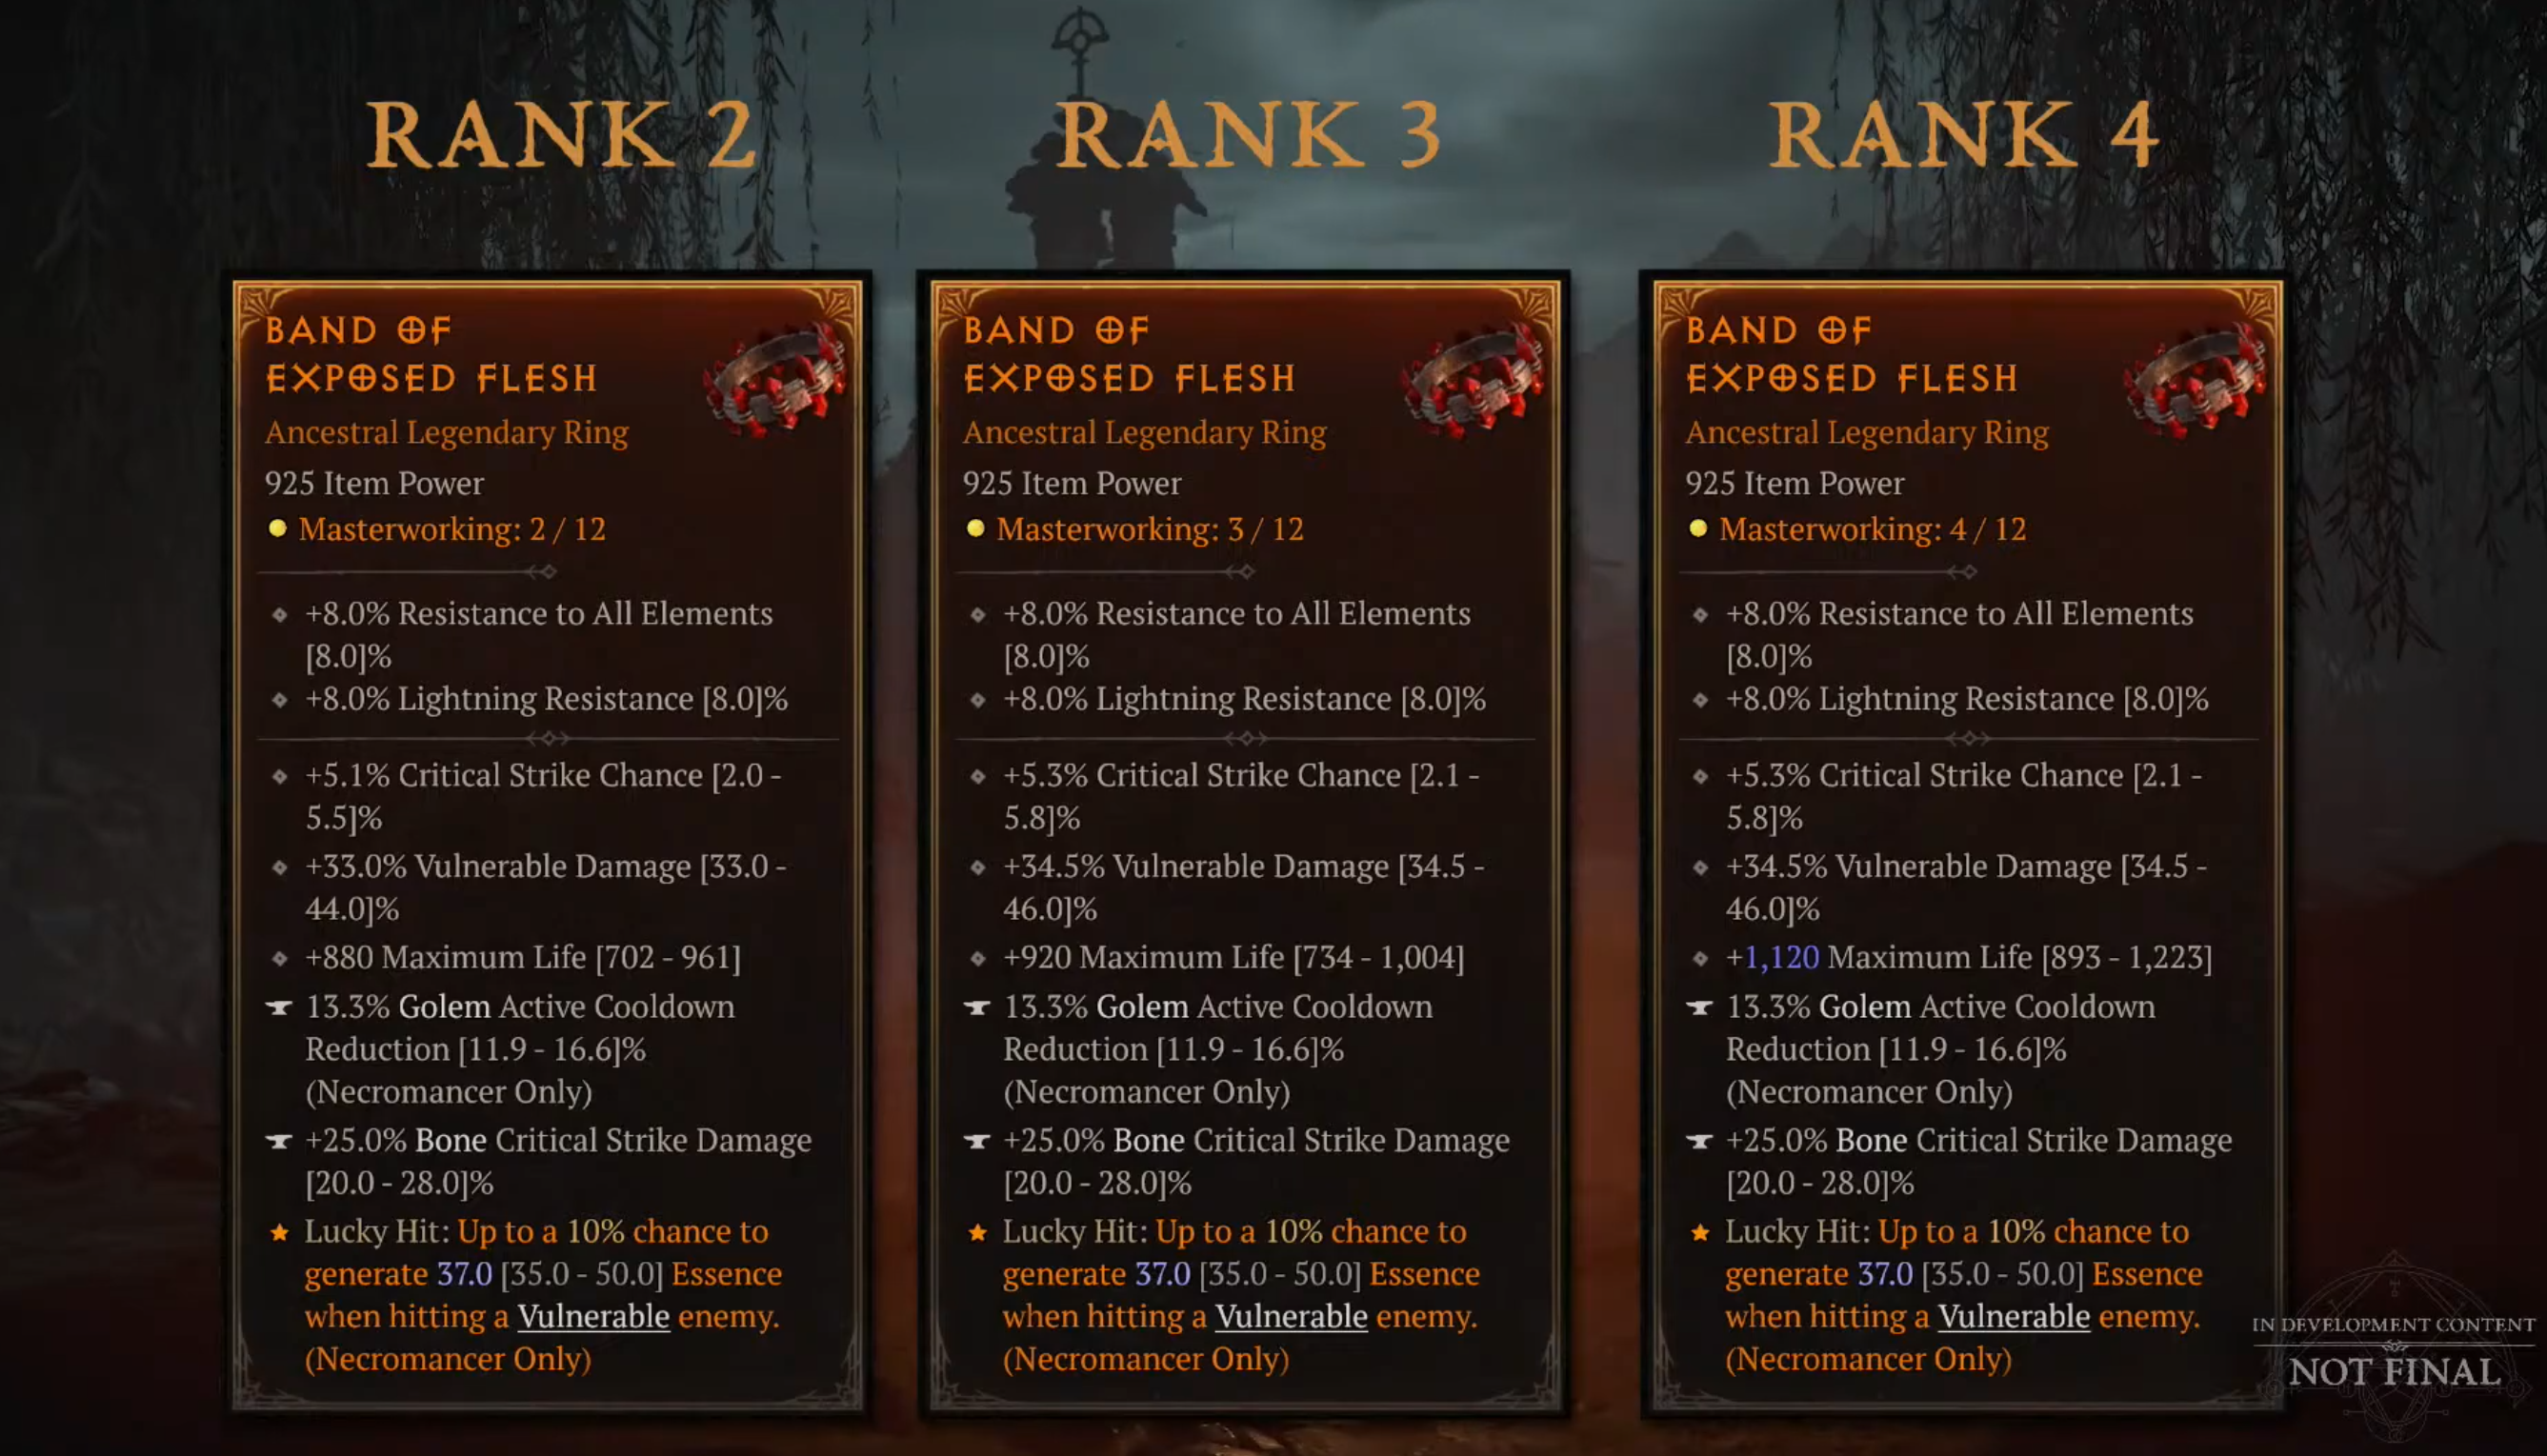 A presentation slide comparing Diablo 4 items at different levels of Masterworking upgrades